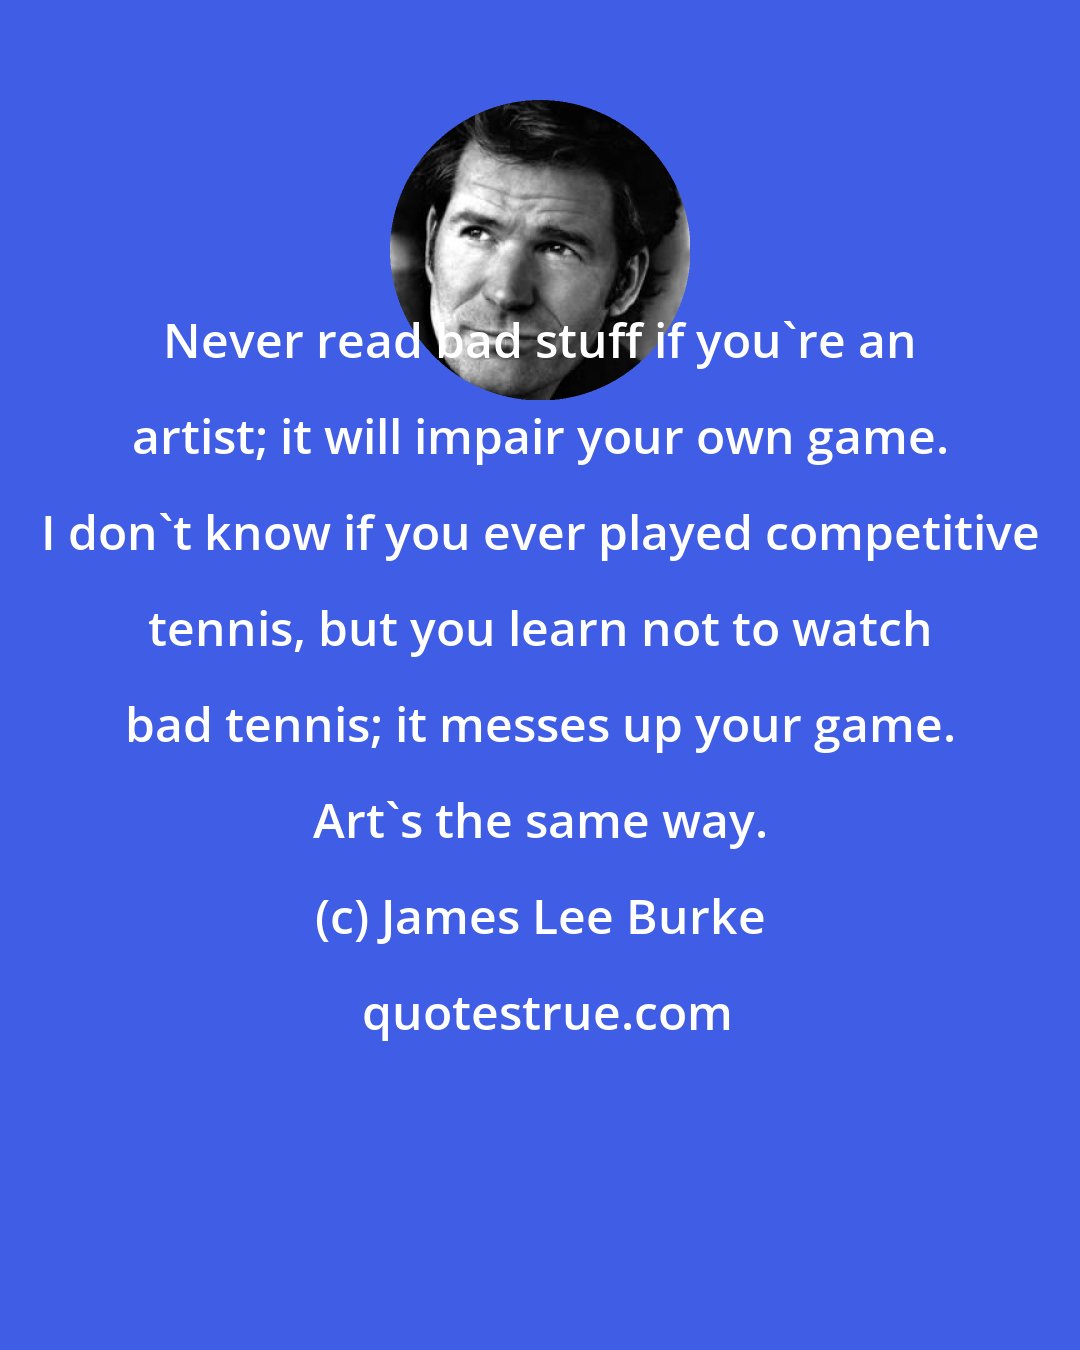 James Lee Burke: Never read bad stuff if you're an artist; it will impair your own game. I don't know if you ever played competitive tennis, but you learn not to watch bad tennis; it messes up your game. Art's the same way.